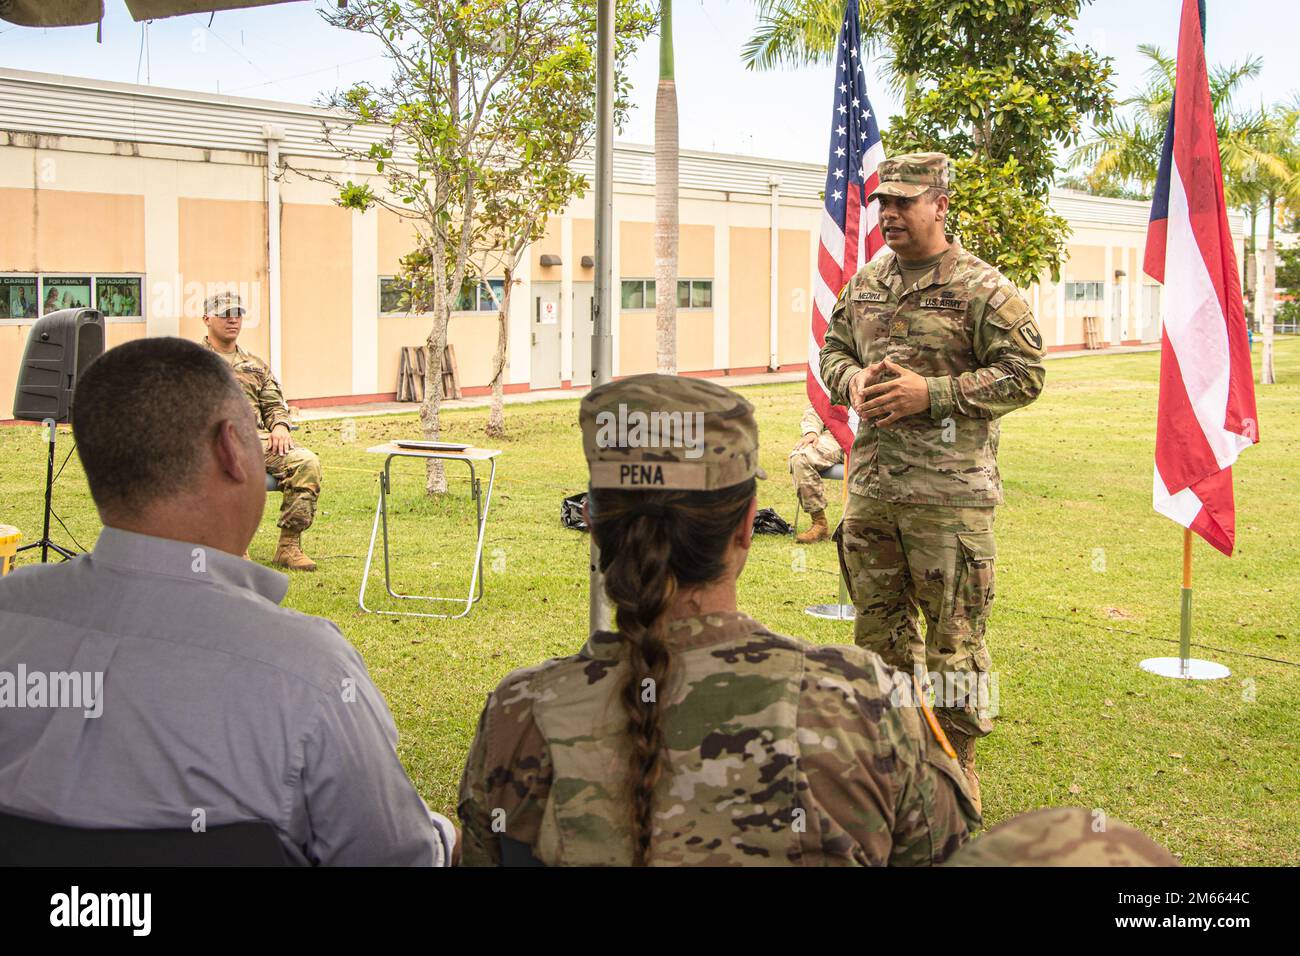 Maj. Luis E. Medina addresses those present during the promotion ceremony of 1st Lt. Karla Torres in Fort Buchanan, April 5, 2022. The U.S. Army and the Puerto Rico Army National Guard recognized Torres's qualities and potential and promoted her to 1st Lieutenant. Stock Photo